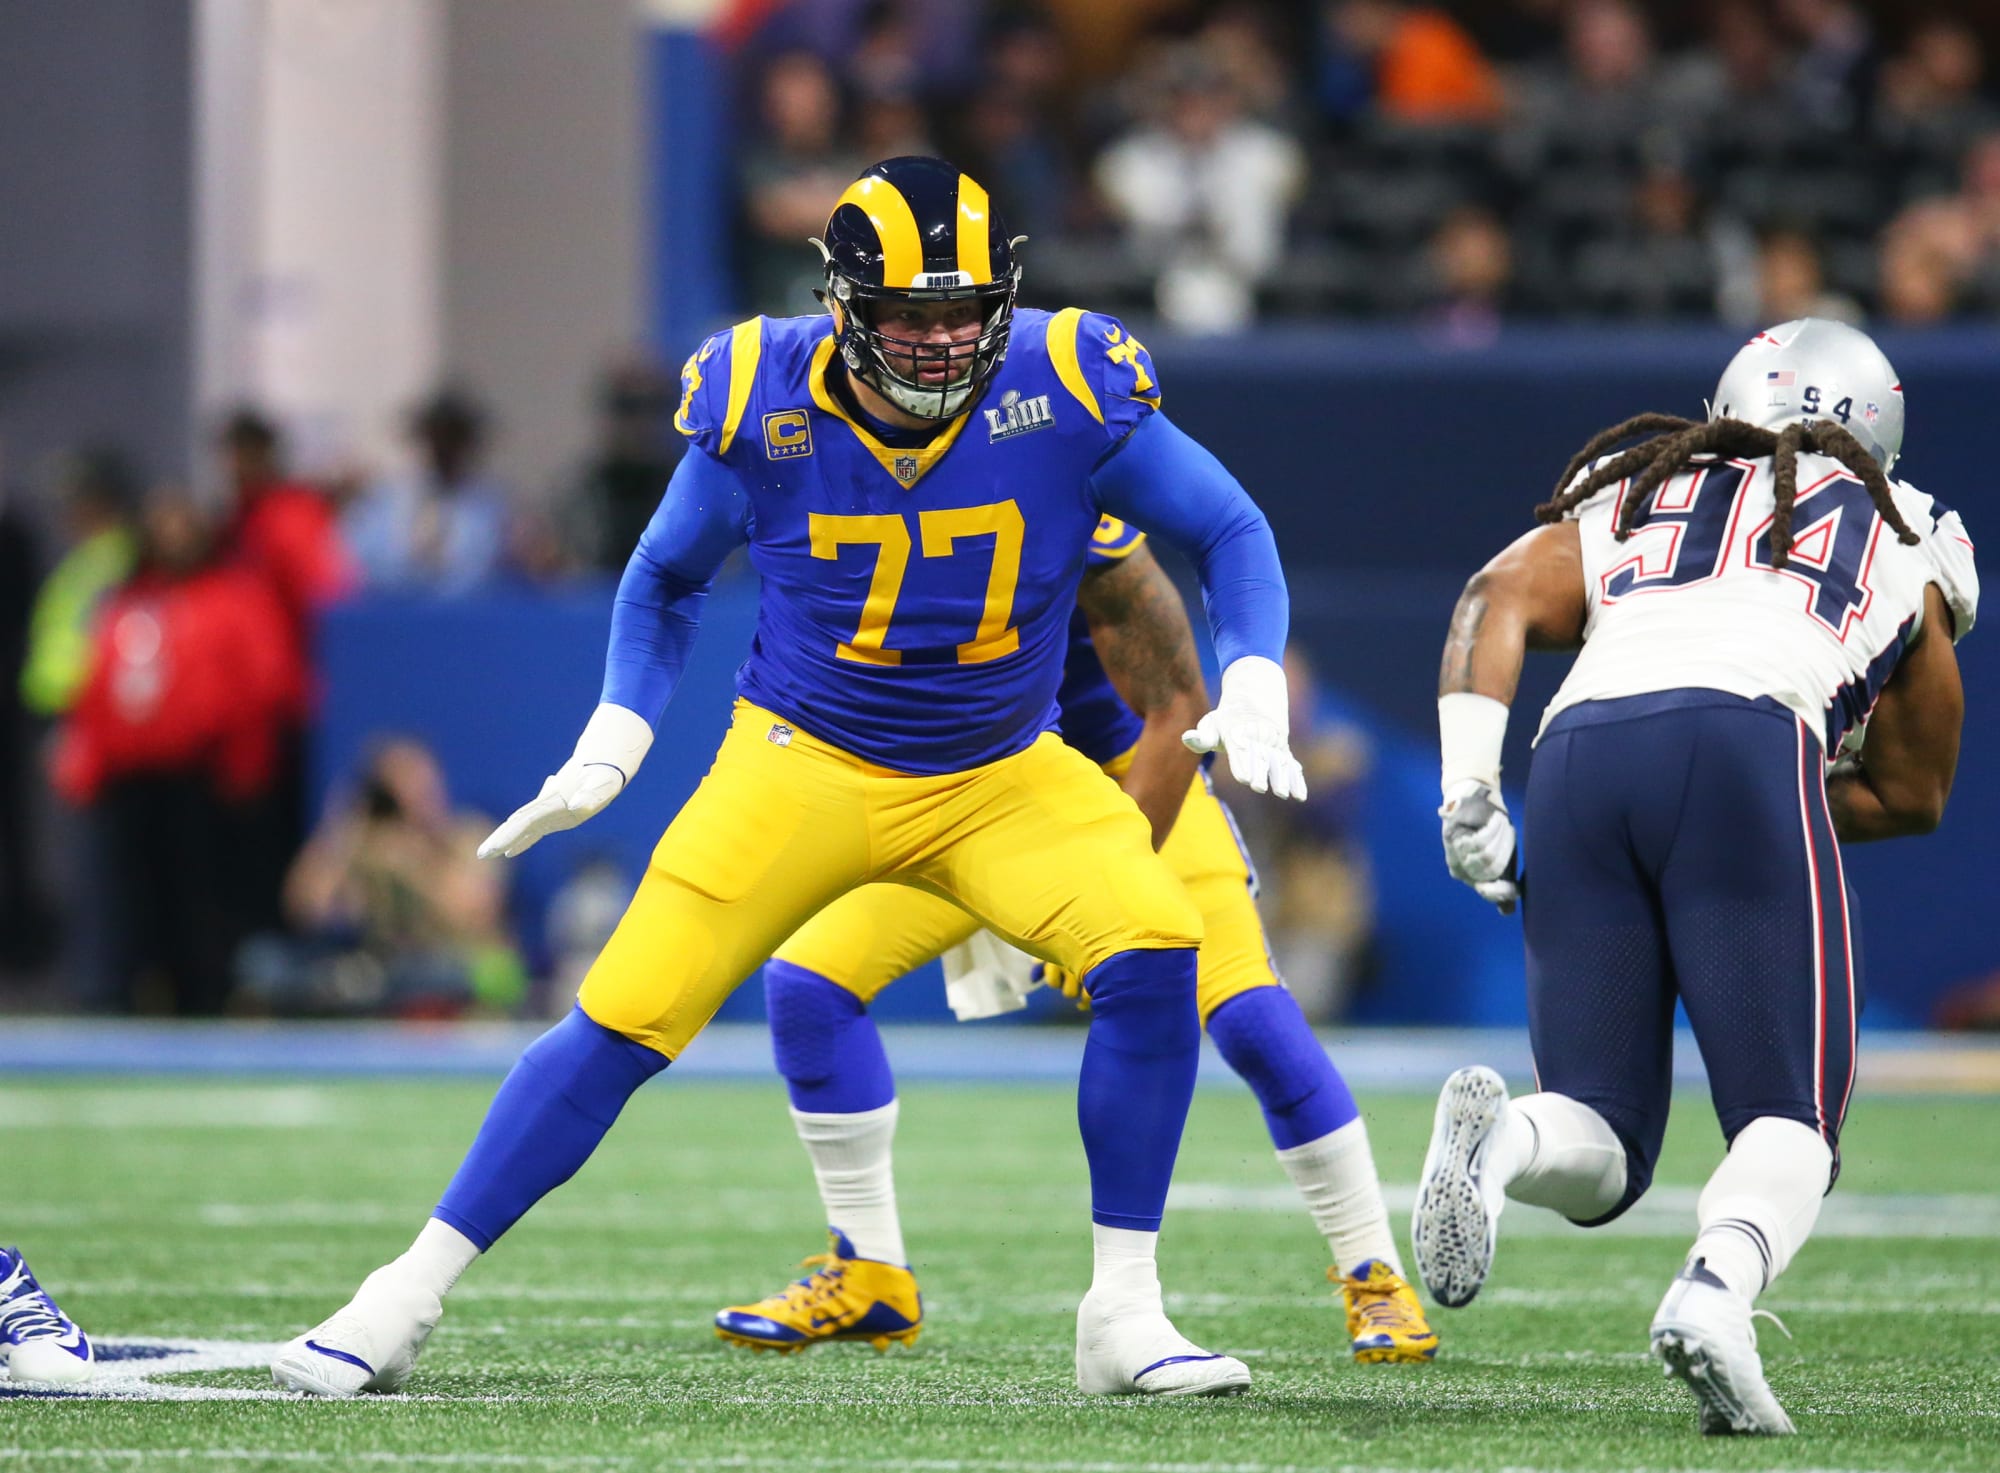 LA Rams injury update: Taylor Rapp and Andrew Whitworth injured